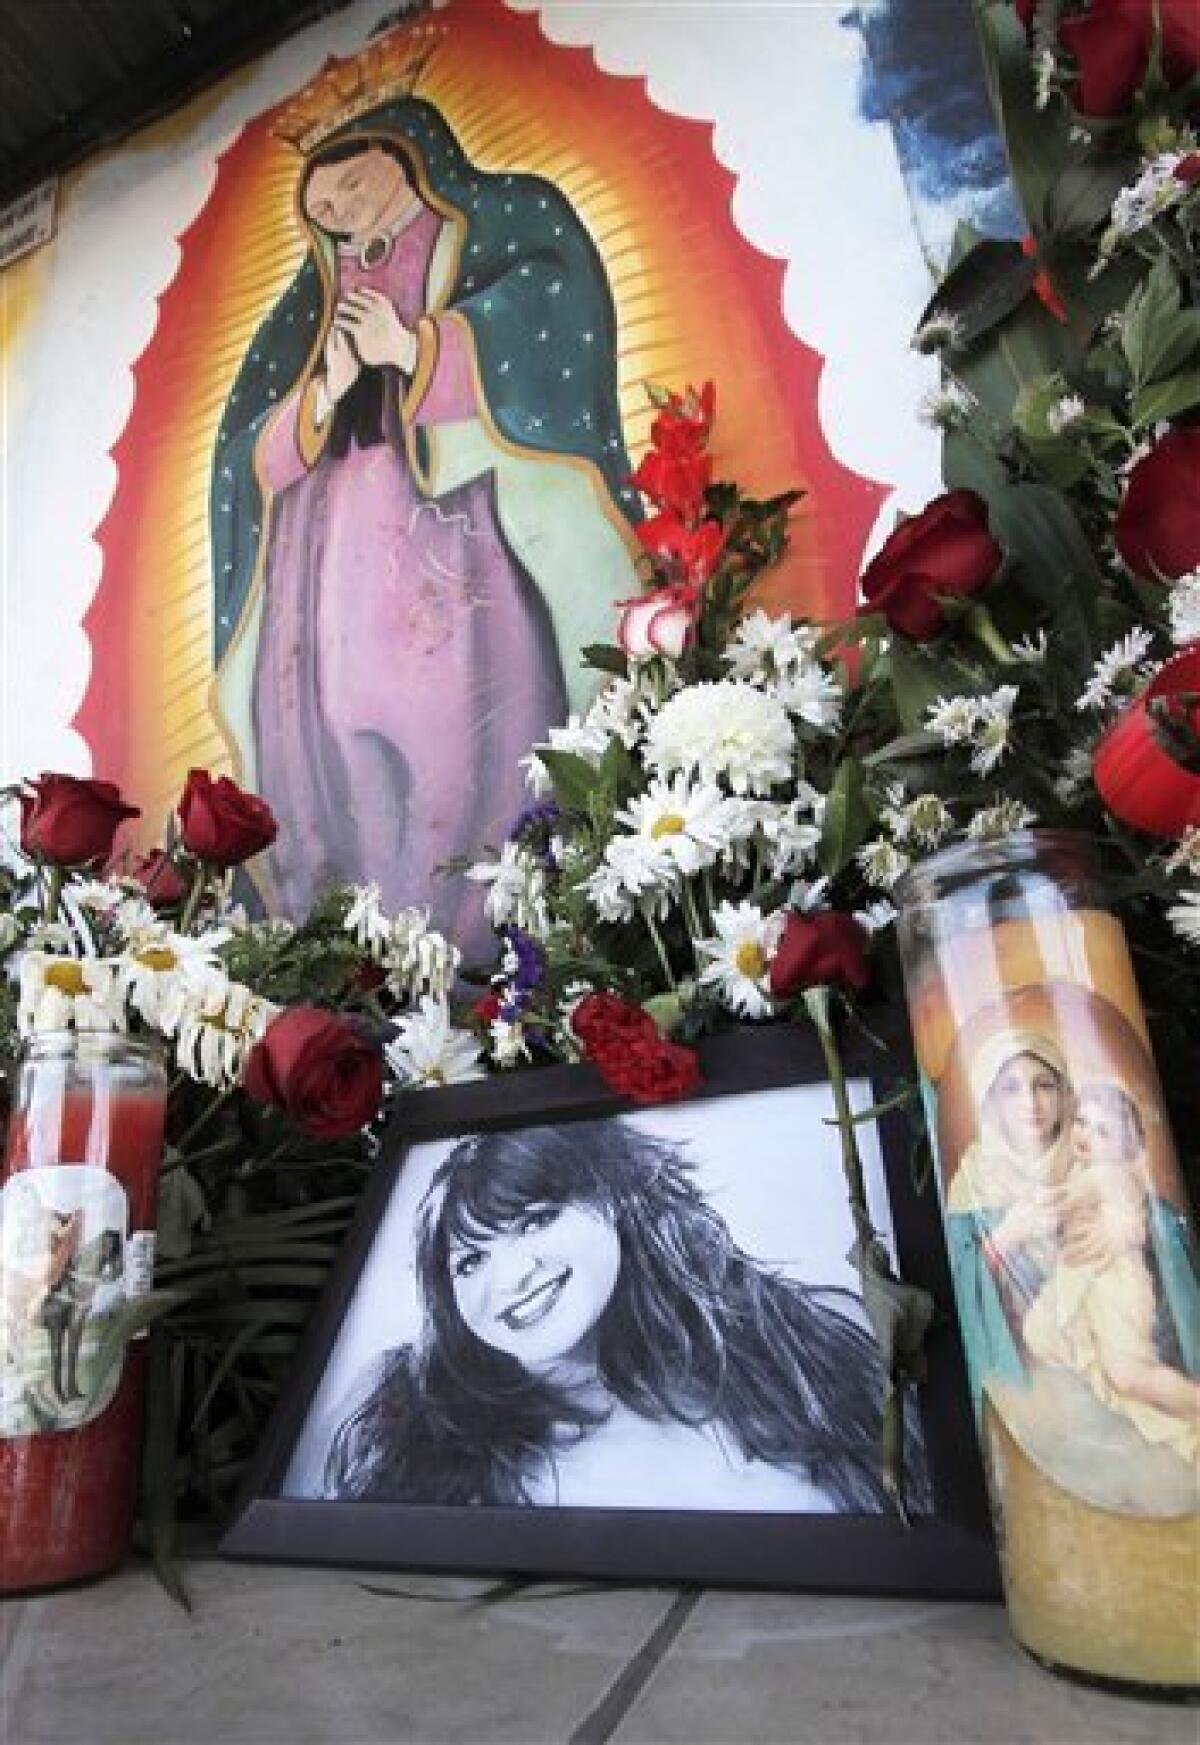 Jenni Rivera's Hologram Debuts at Day of the Dead Event